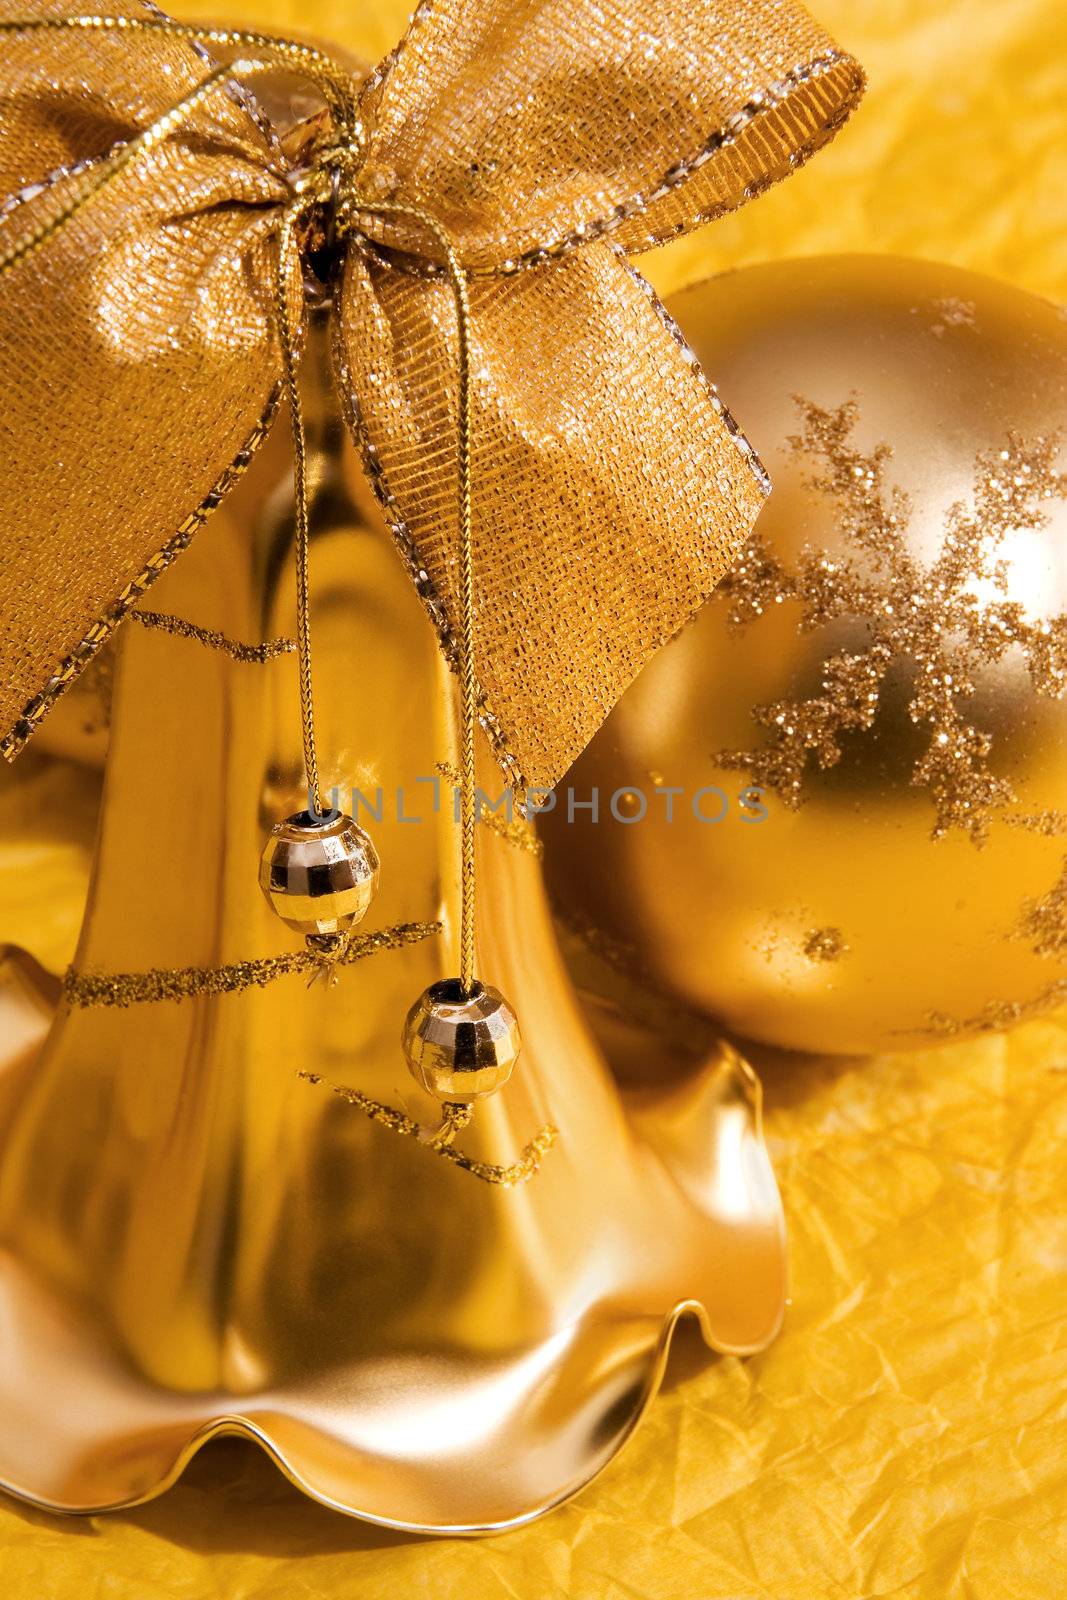 The Golden Christmas bell and ball. Close-up